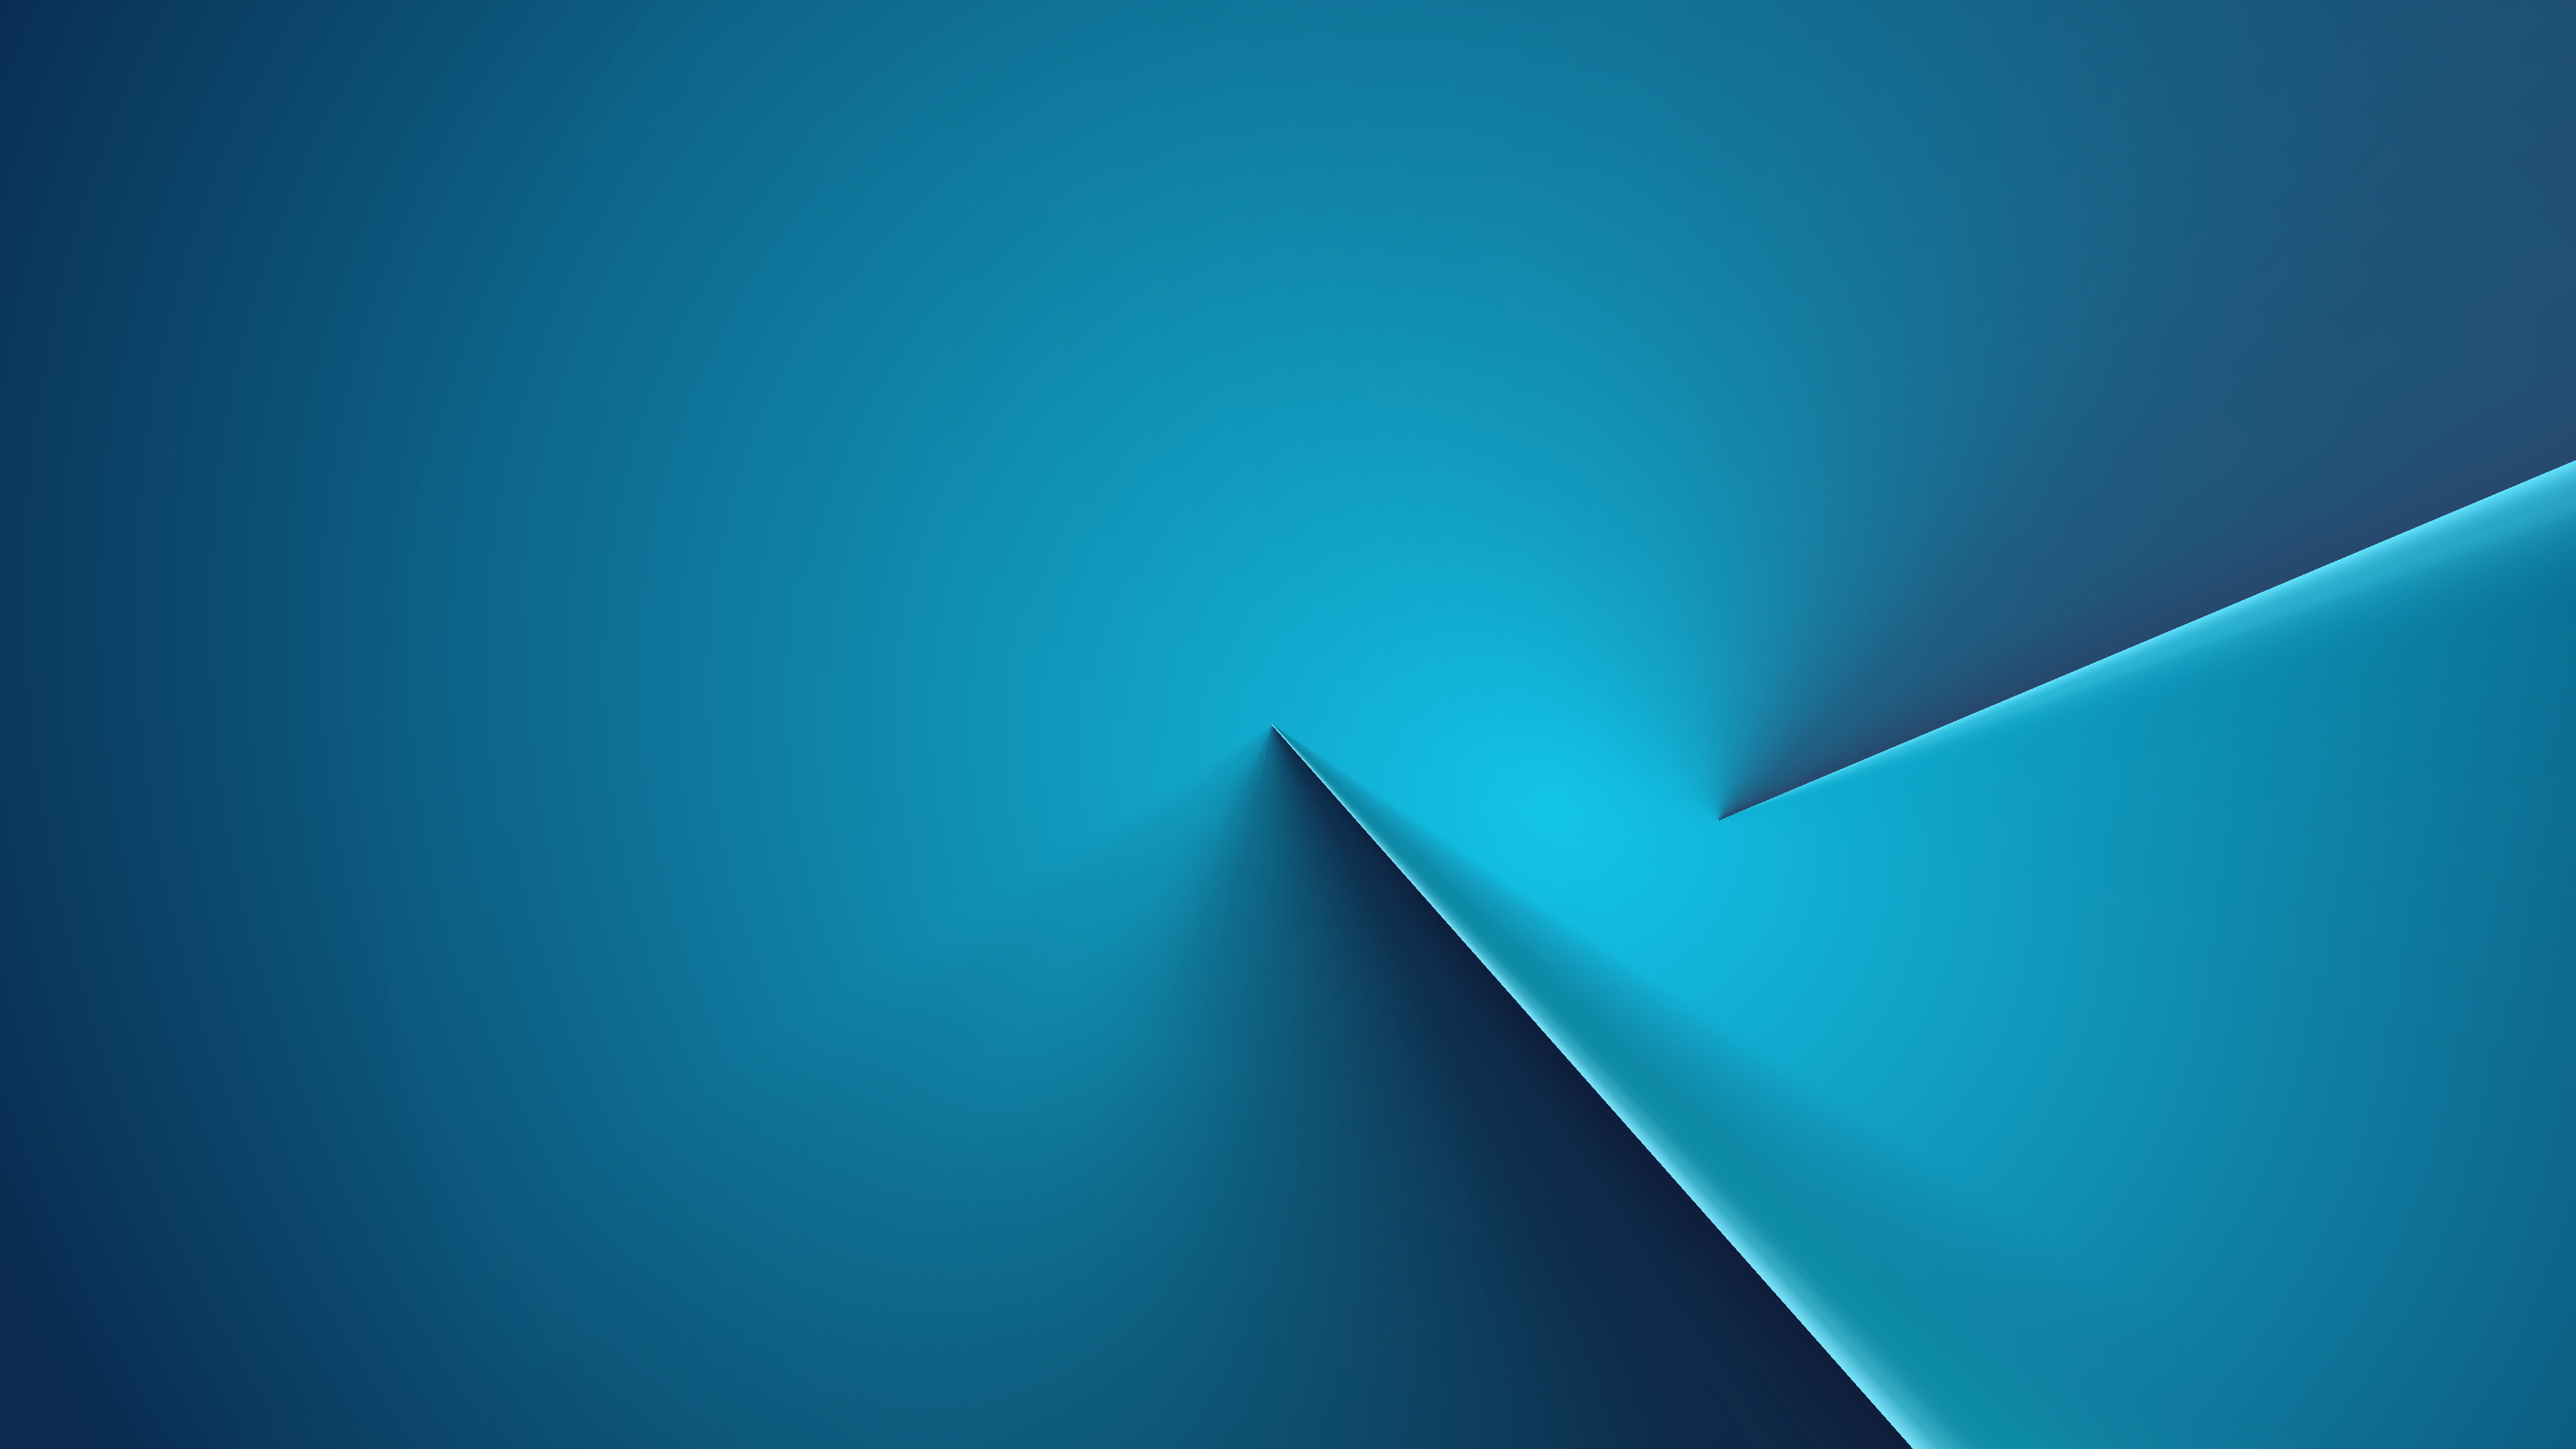 Abstract Blue Line 4k Wallpaper,HD Abstract Wallpapers,4k Wallpapers